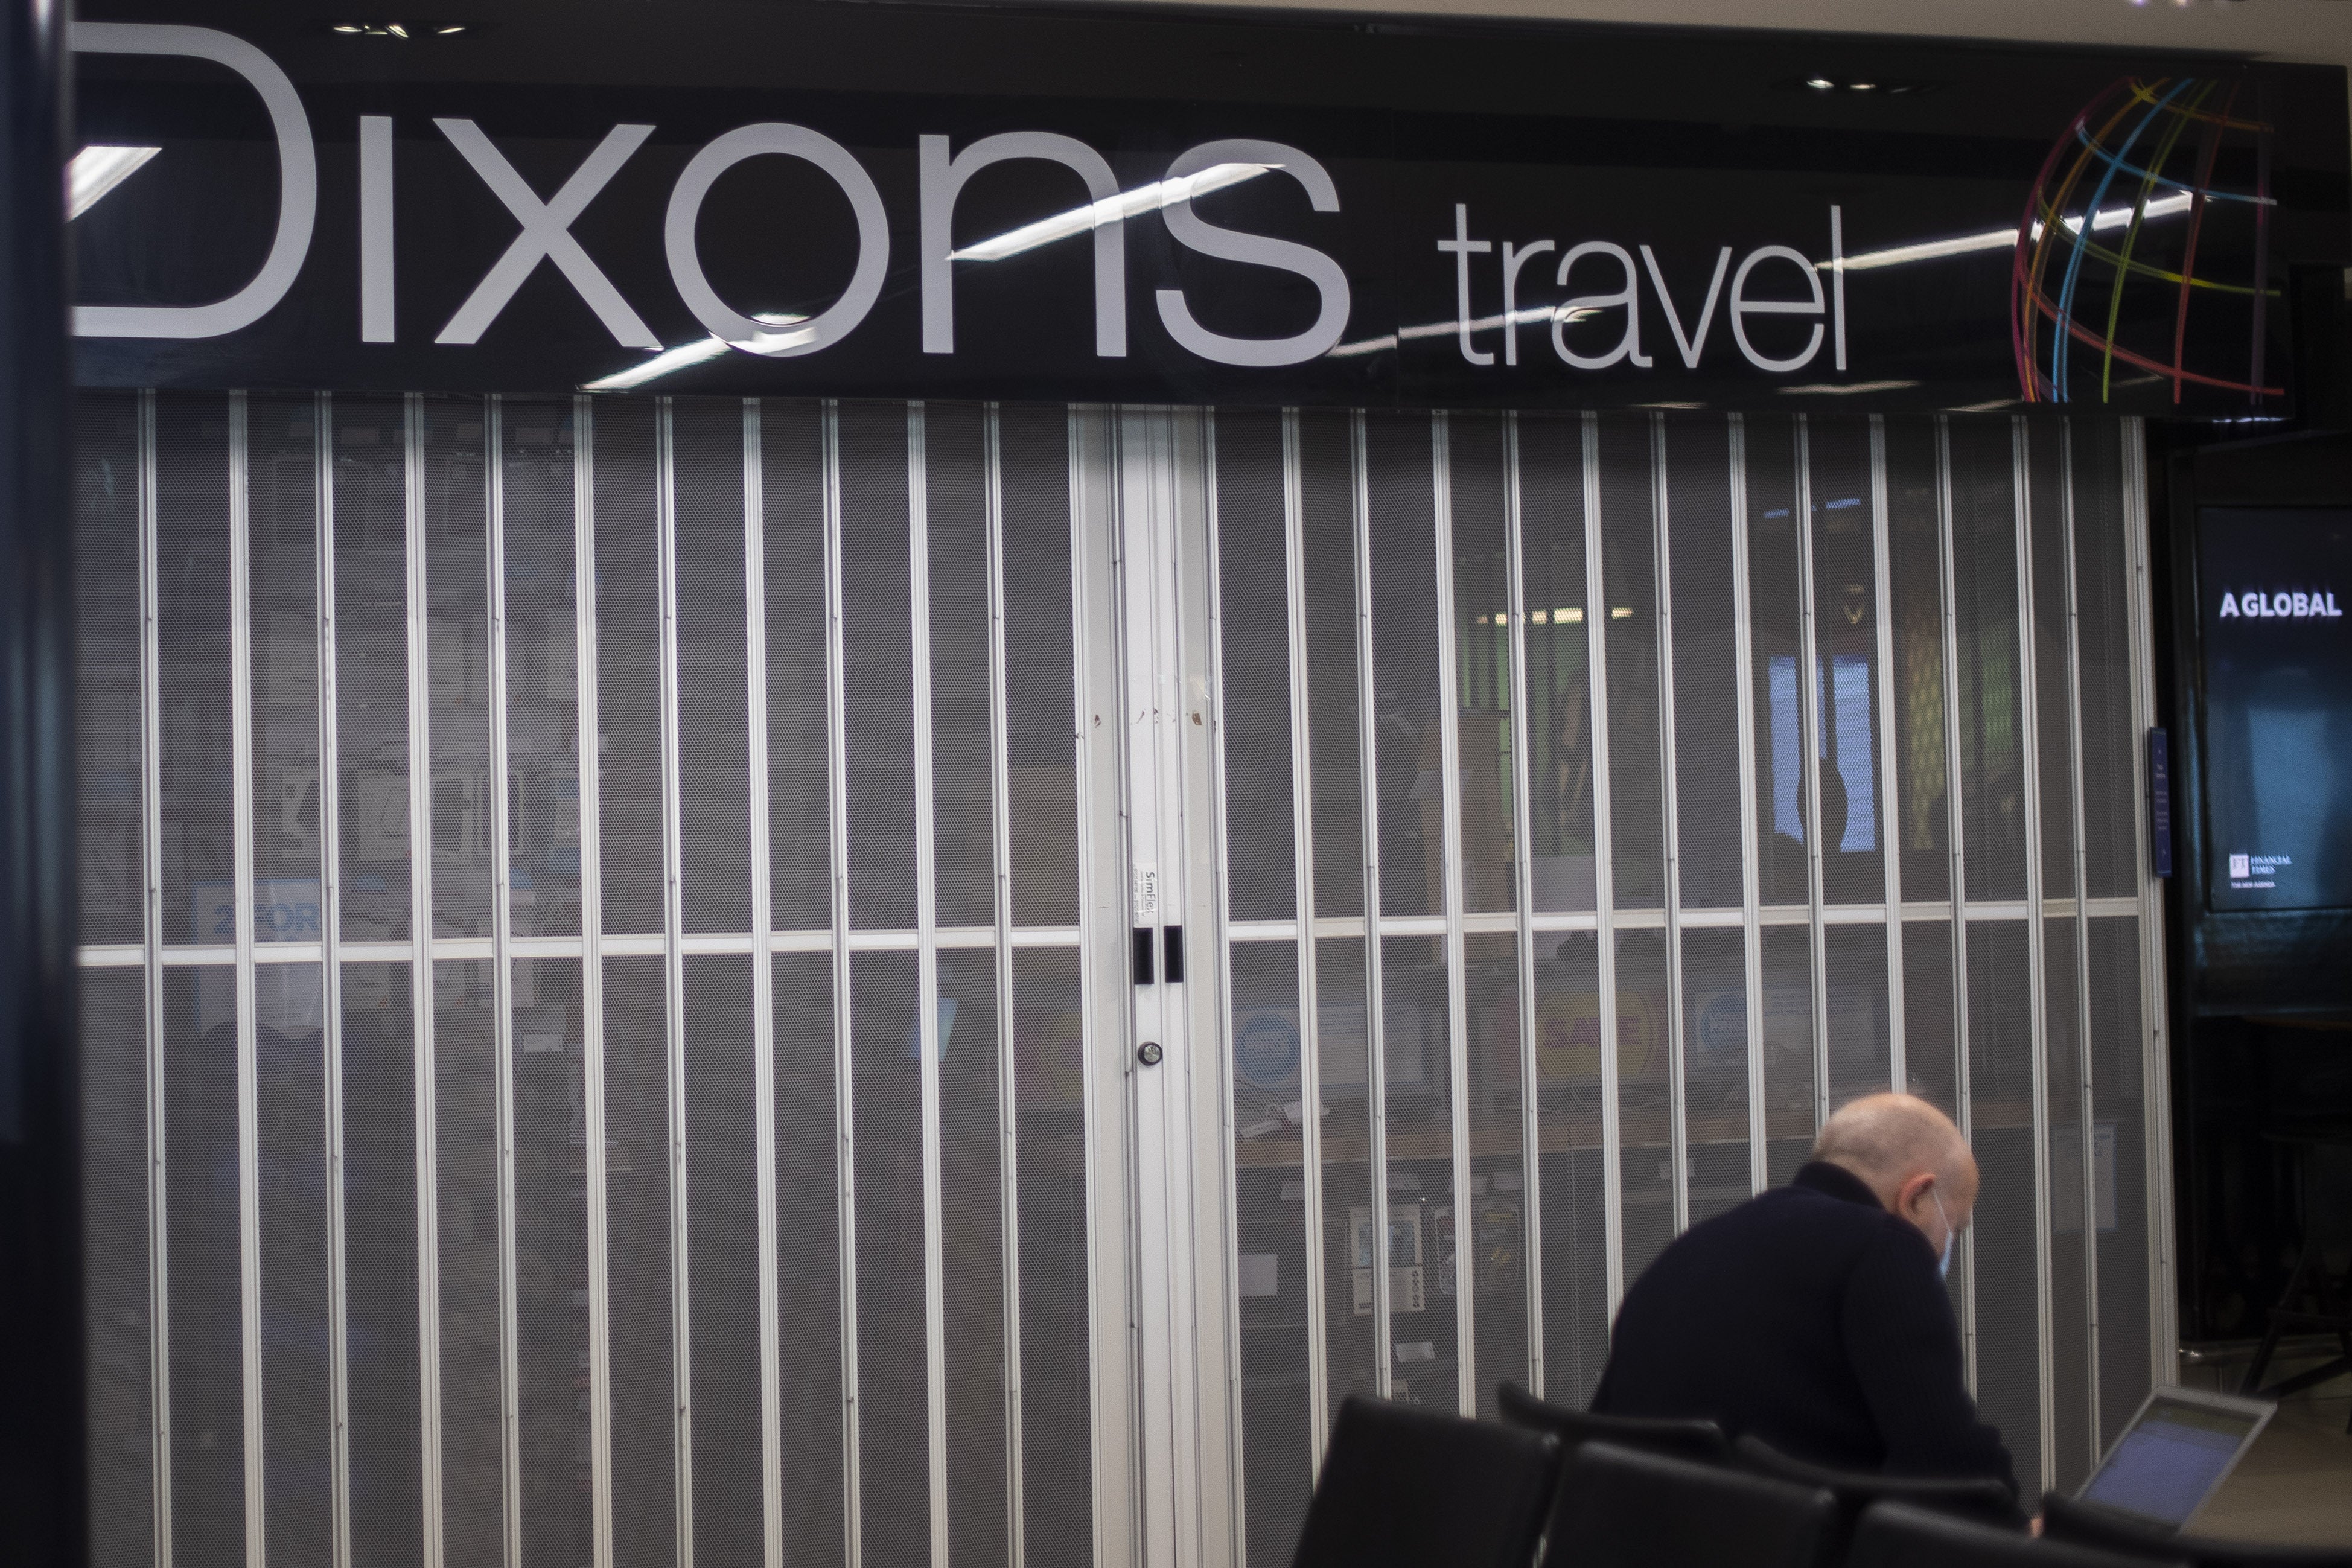 WH Smith has bought a raft of former Dixons Travel stores in airports